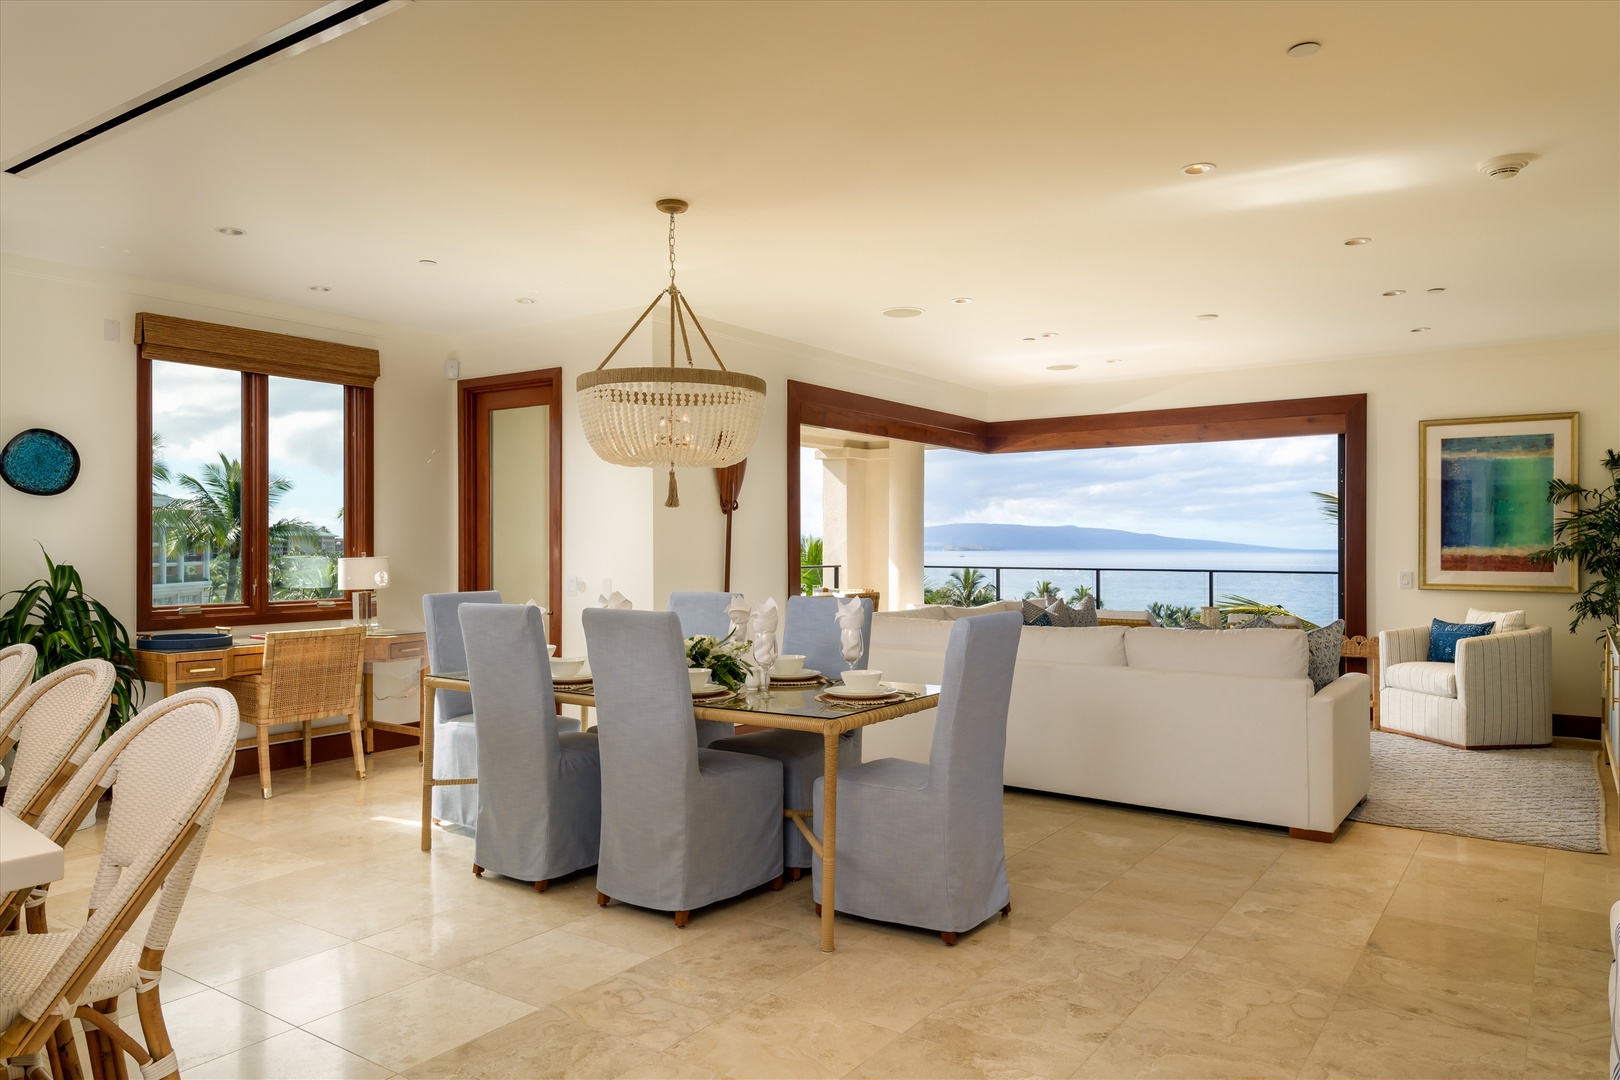 Wailea Vacation Rentals, Blue Ocean Suite H401 at Wailea Beach Villas* - Expansive Ocean View Great Room with Dining and Gourmet-Style Kitchen